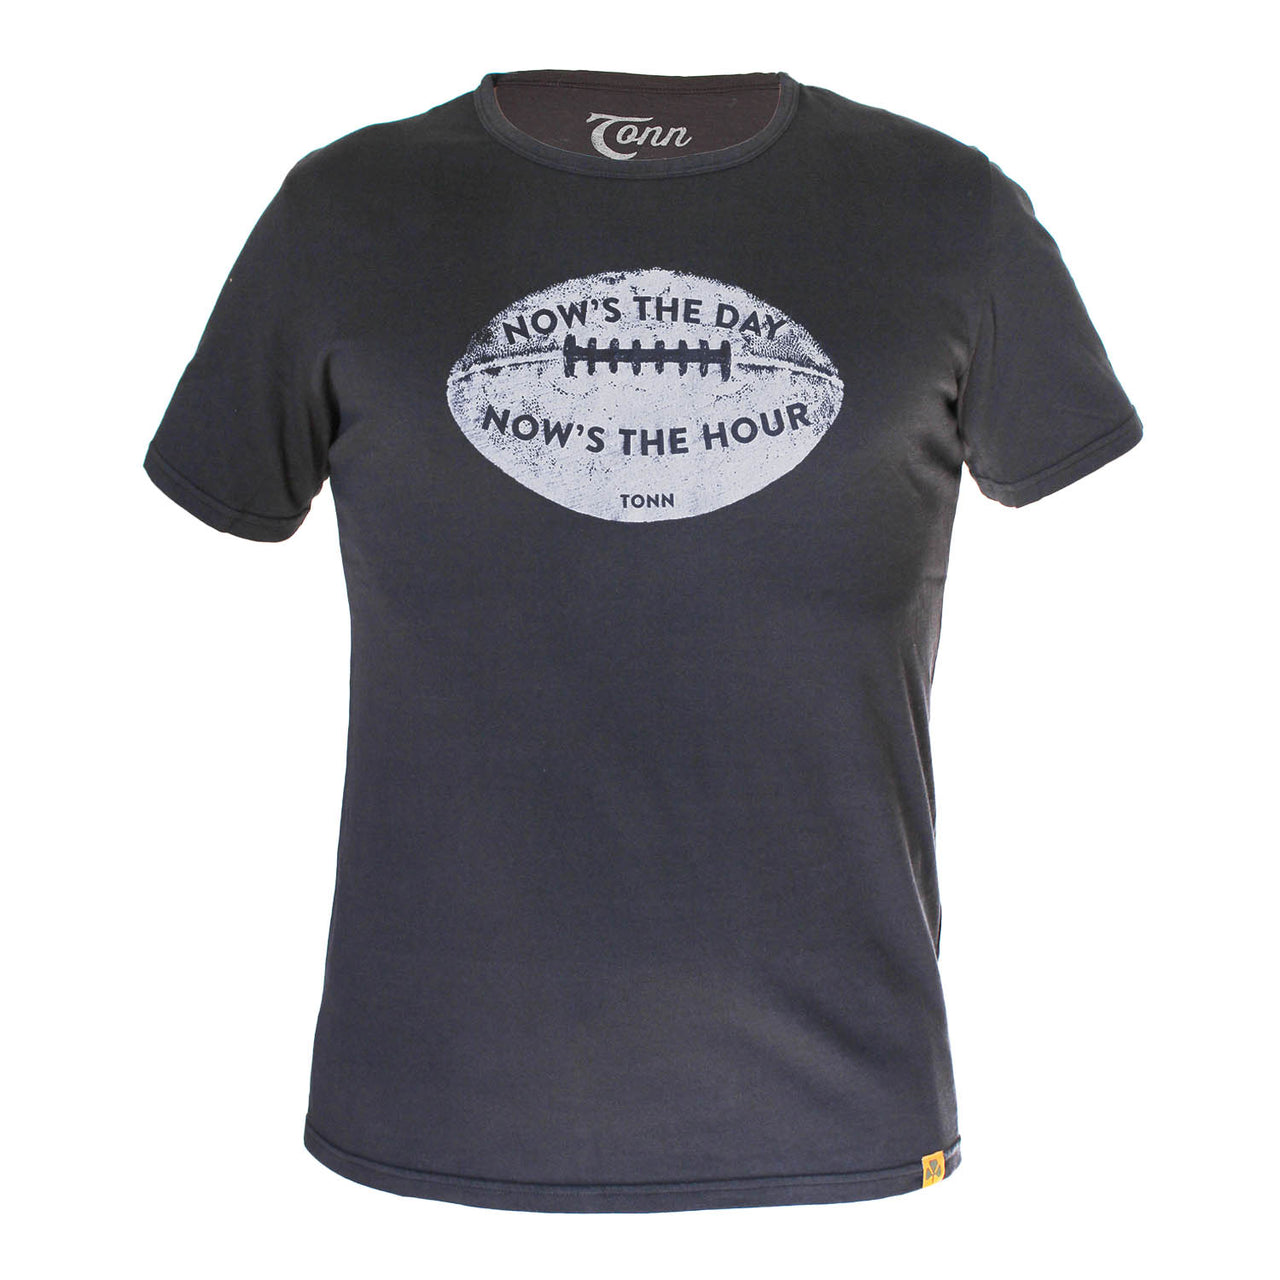 Now's the Day Rugby Crew Neck Tee Black - LAST ONE!